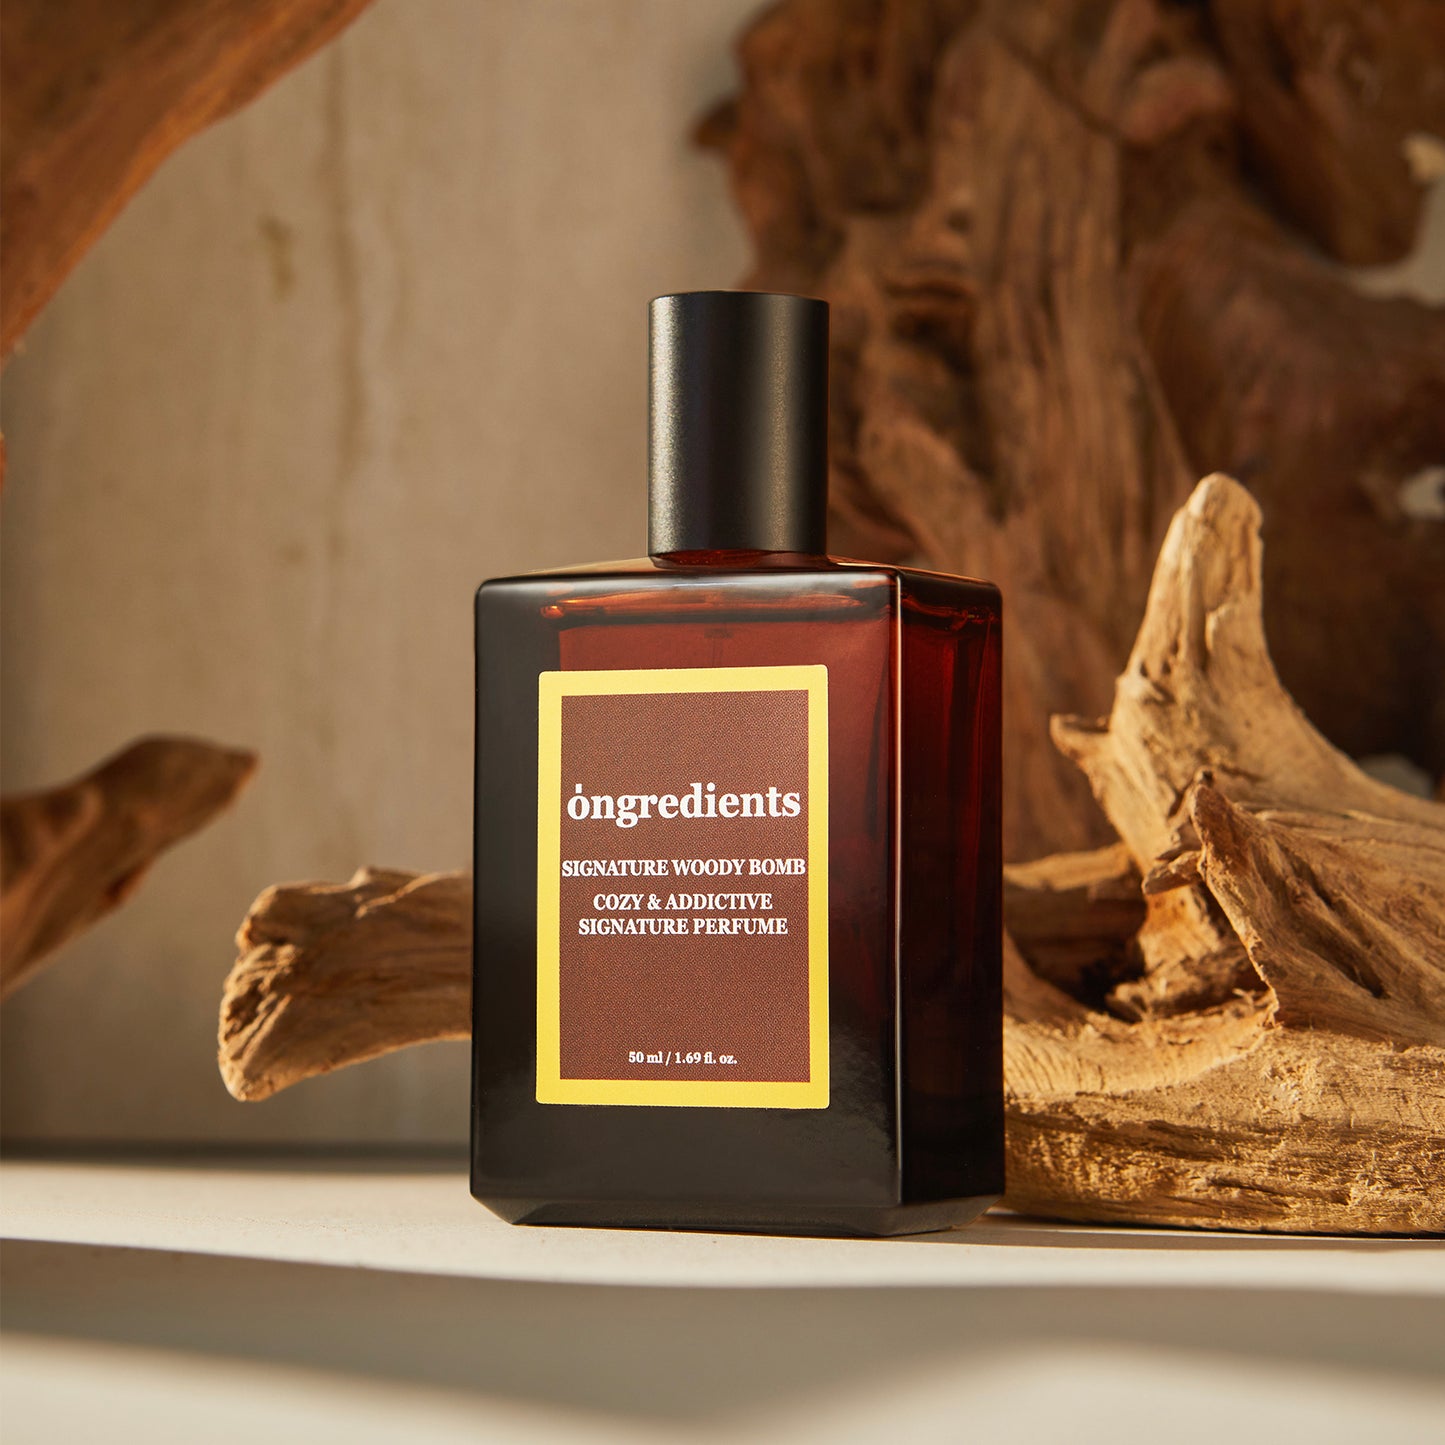 Ongredients Signature Woody Bomb Perfume